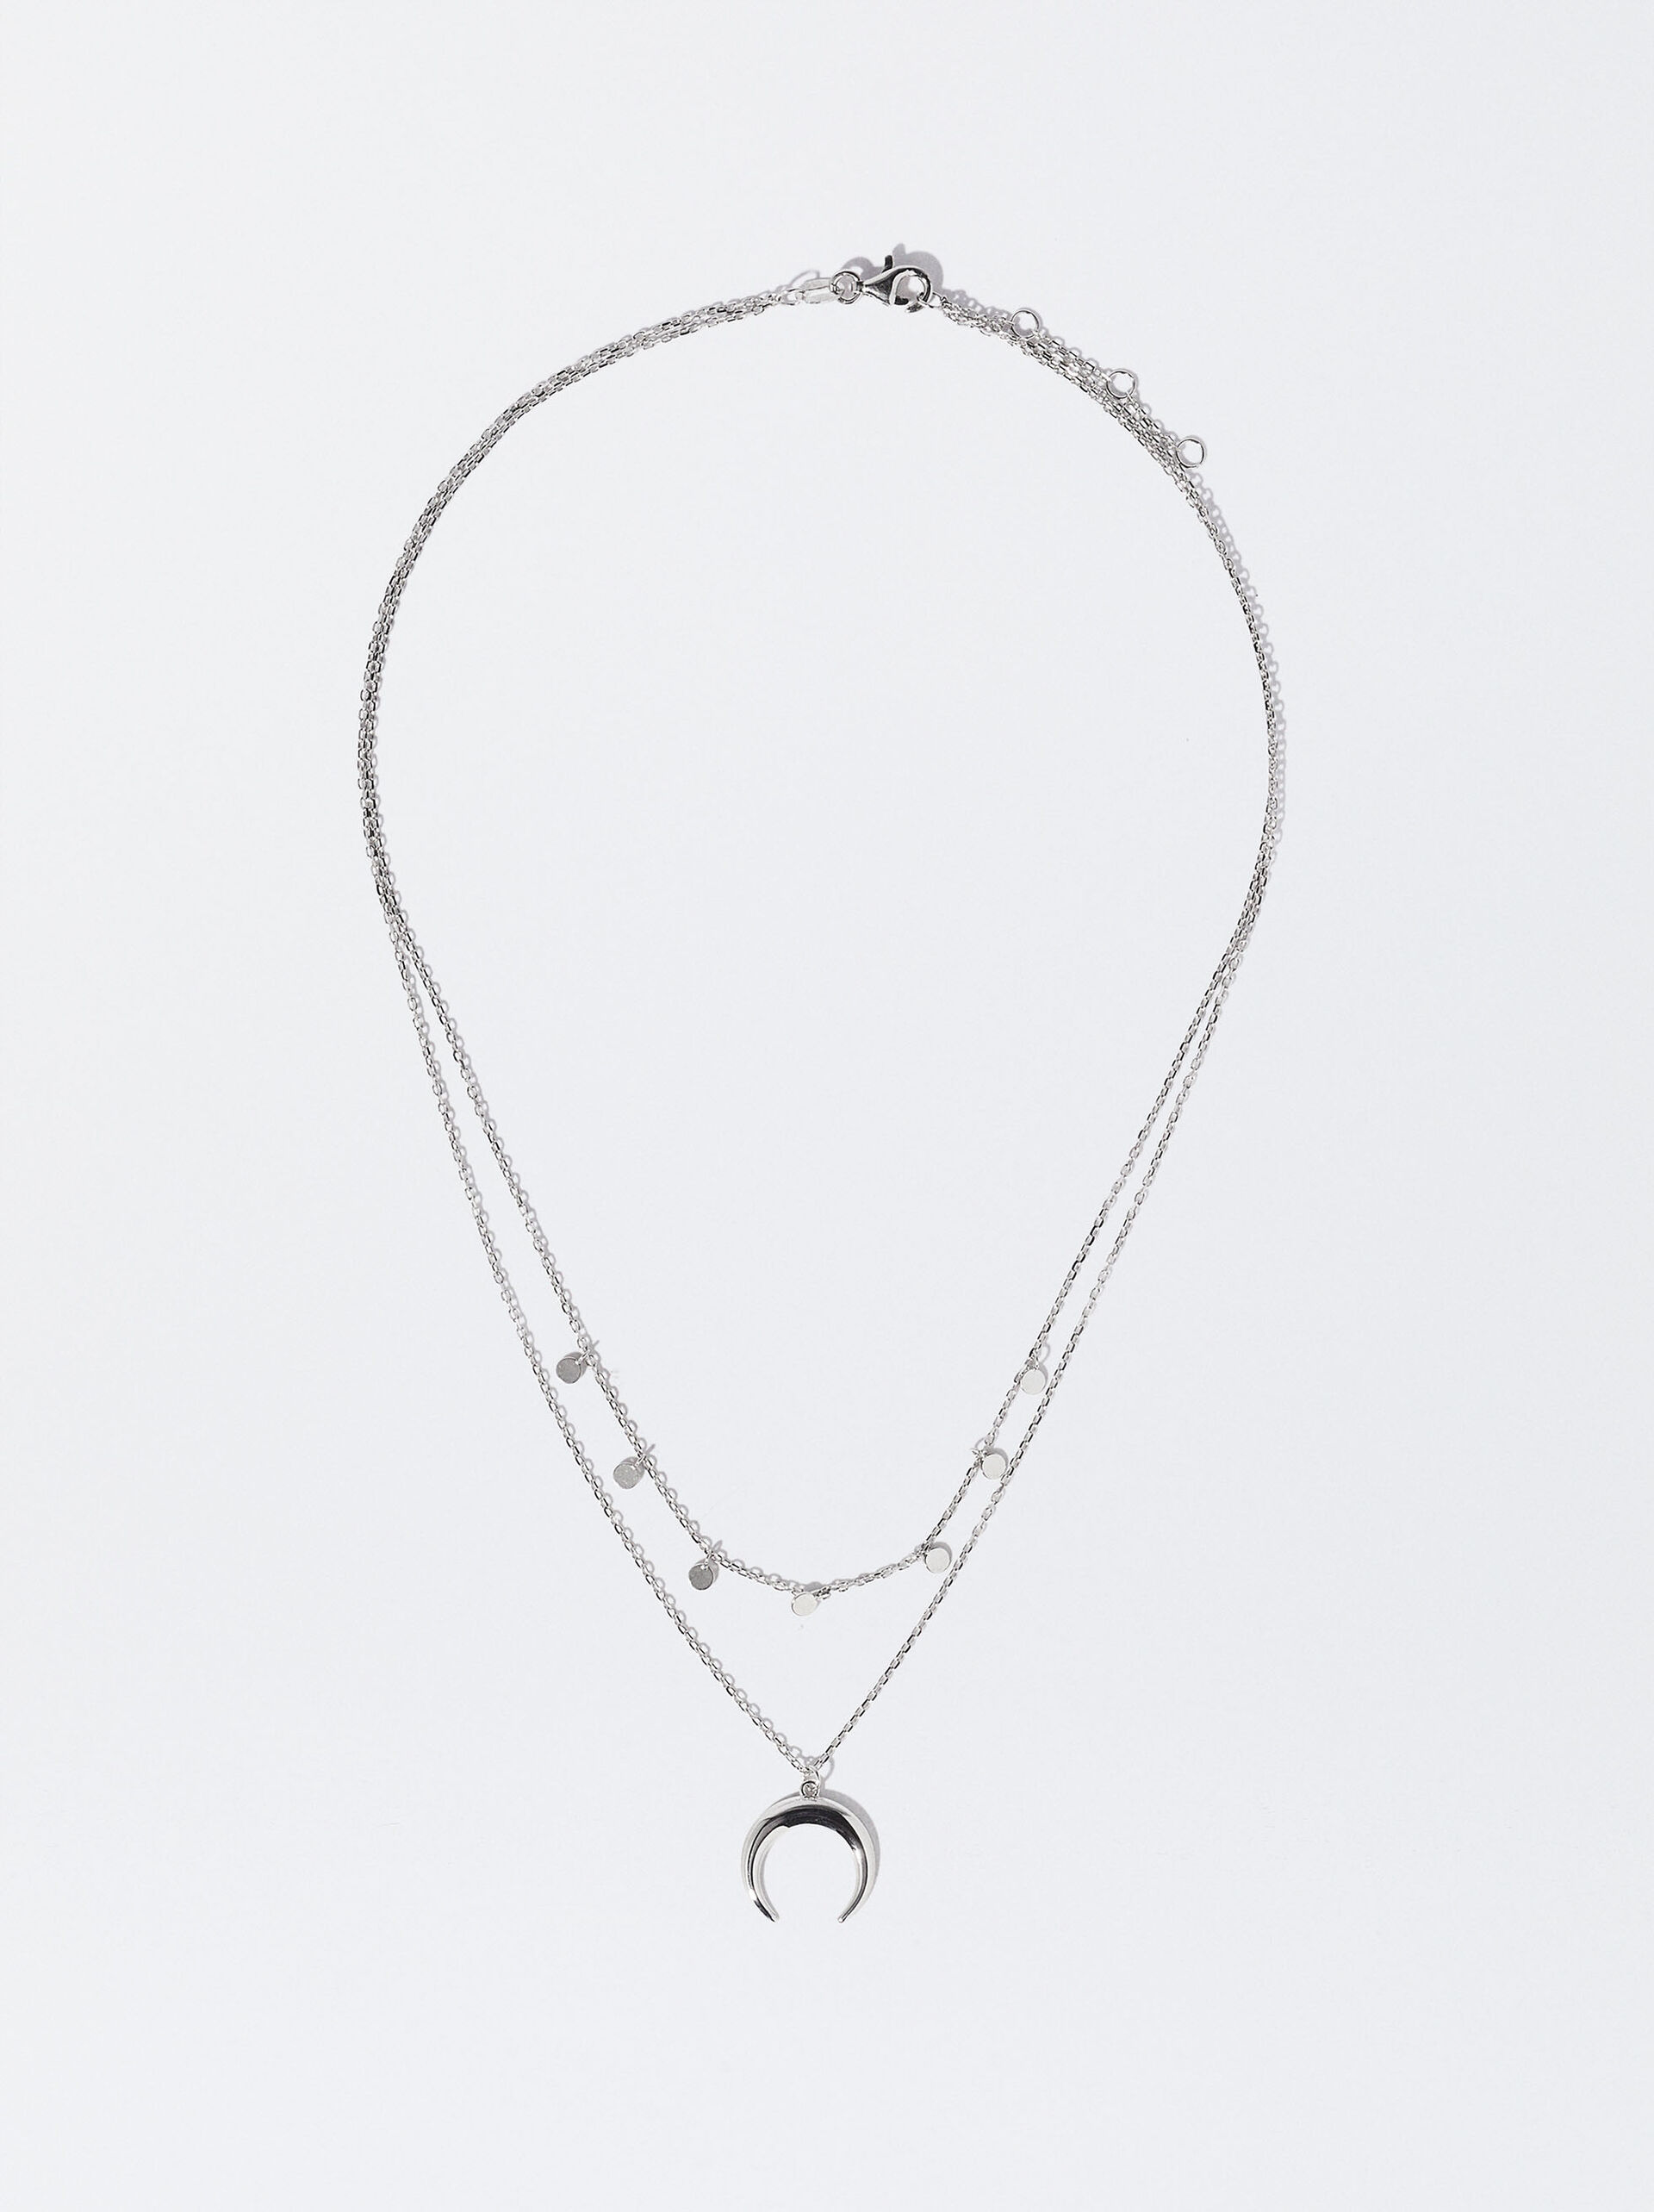 Short 925 Silver Necklace With Horn Pendant image number 2.0